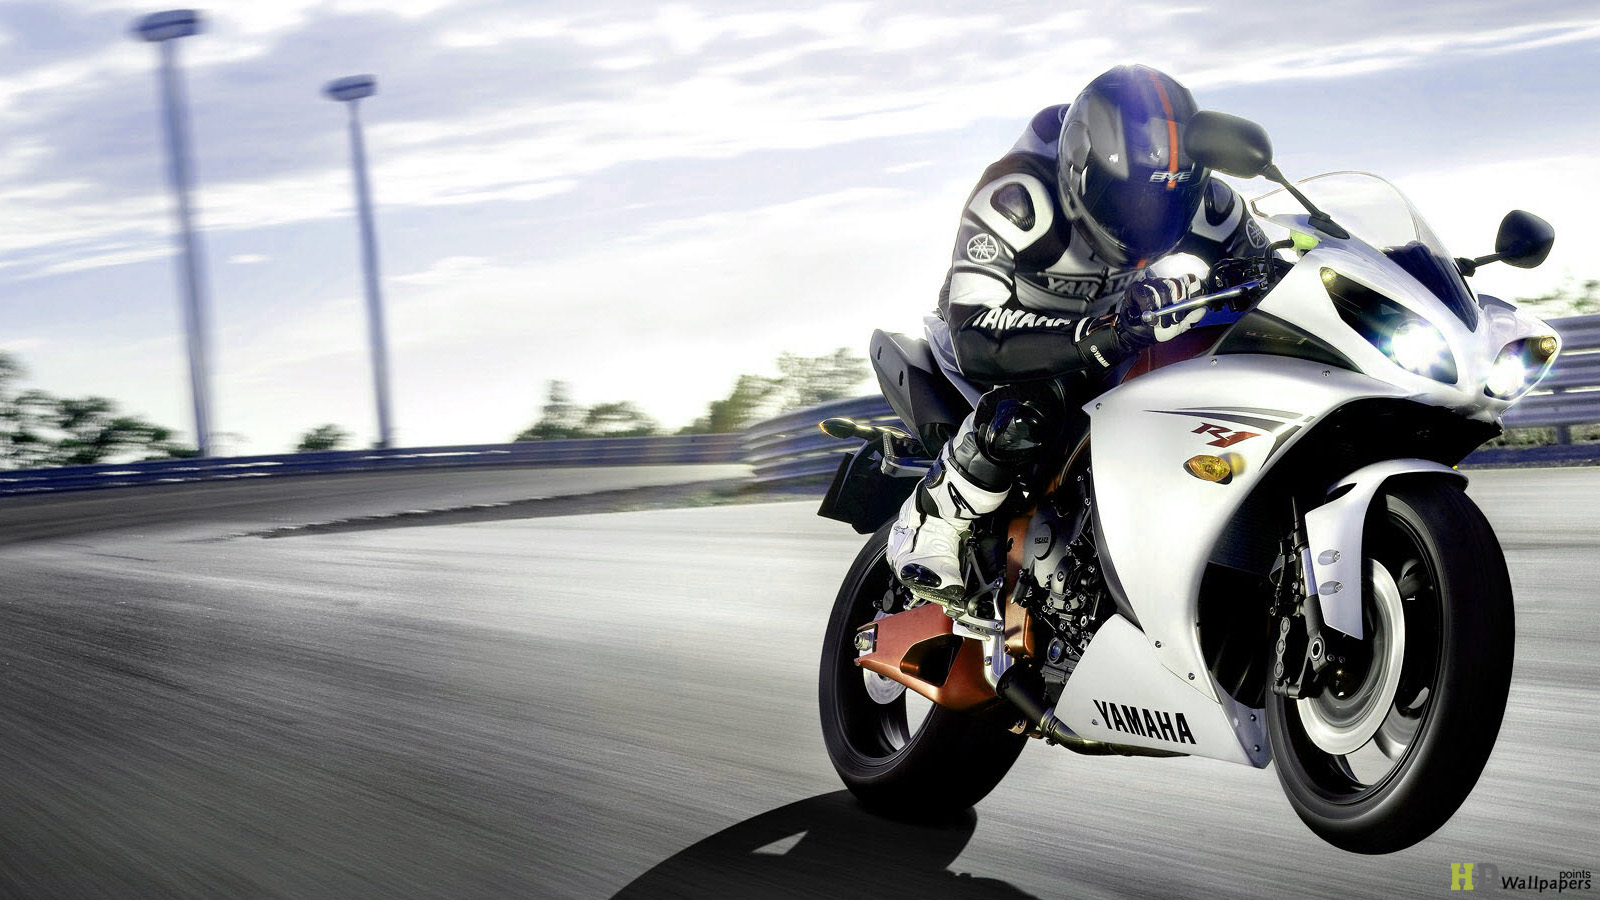 Amazing Motorcycle Racing Pictures & Backgrounds